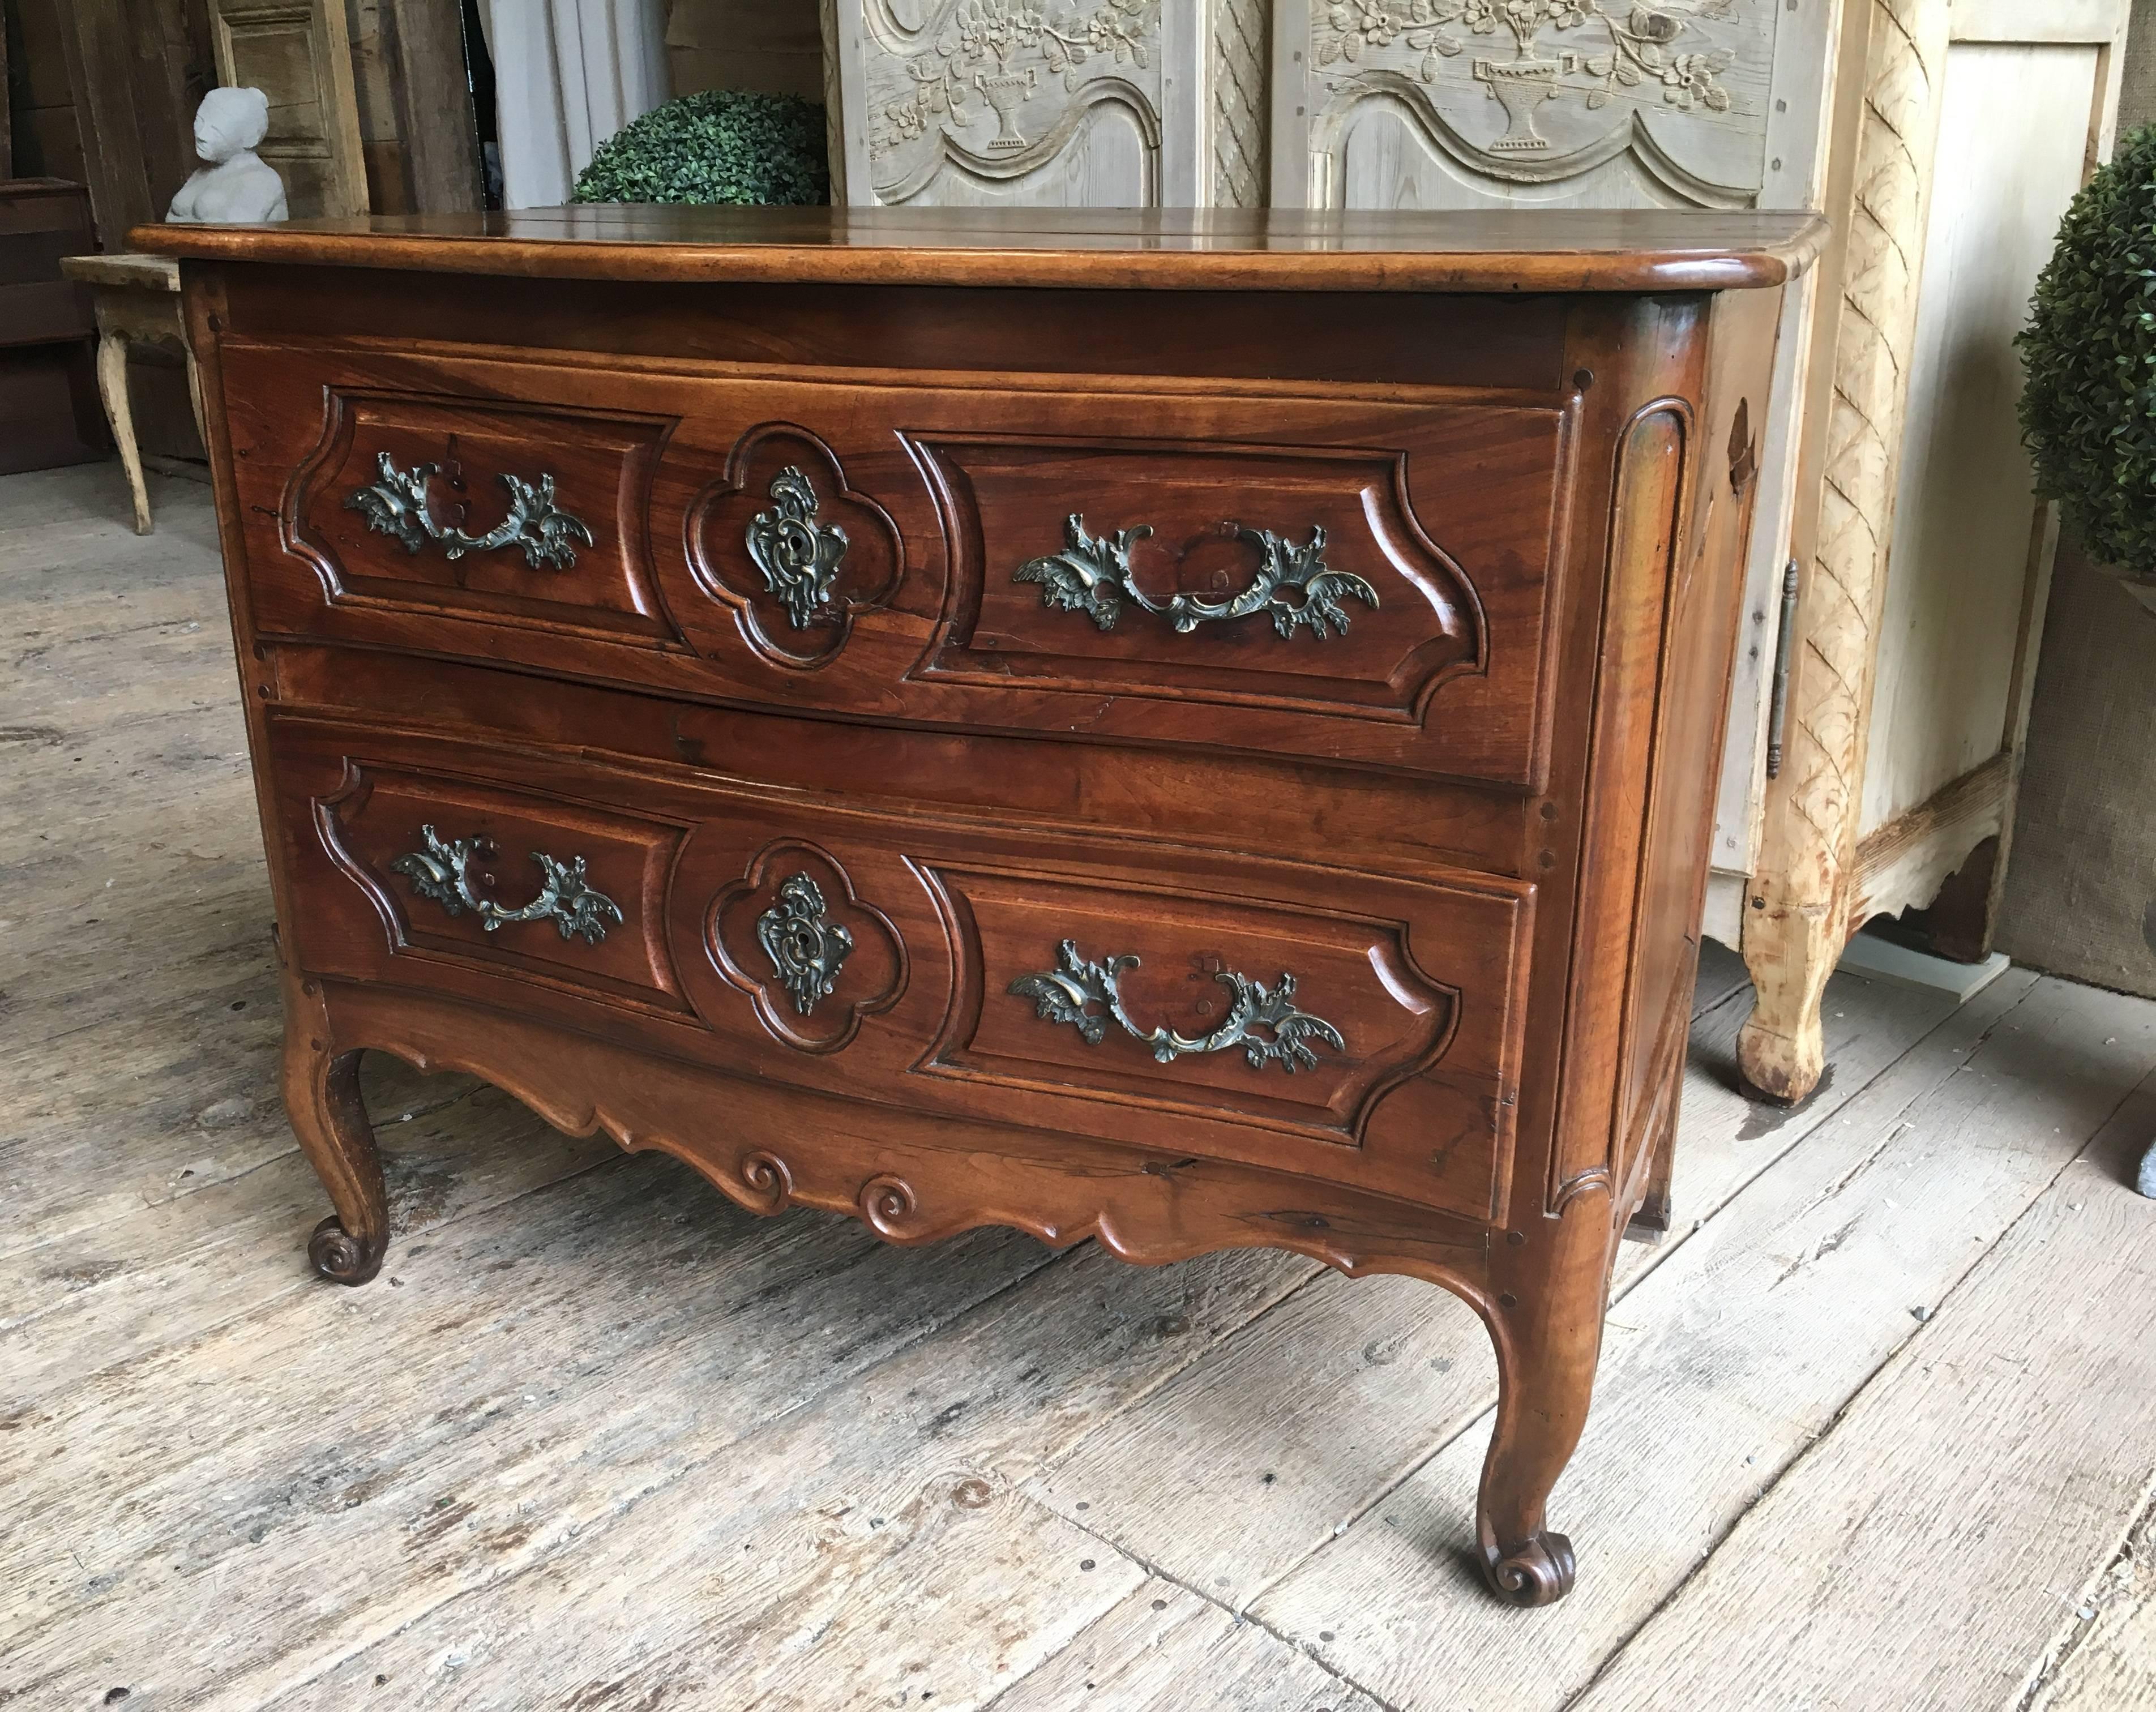 A charming two-drawer Provincial commode in walnut, circa 1760 with a serpentine top and case, nicely carved drawers and scalloped apron on cabriole legs with escargot feet. South of France.